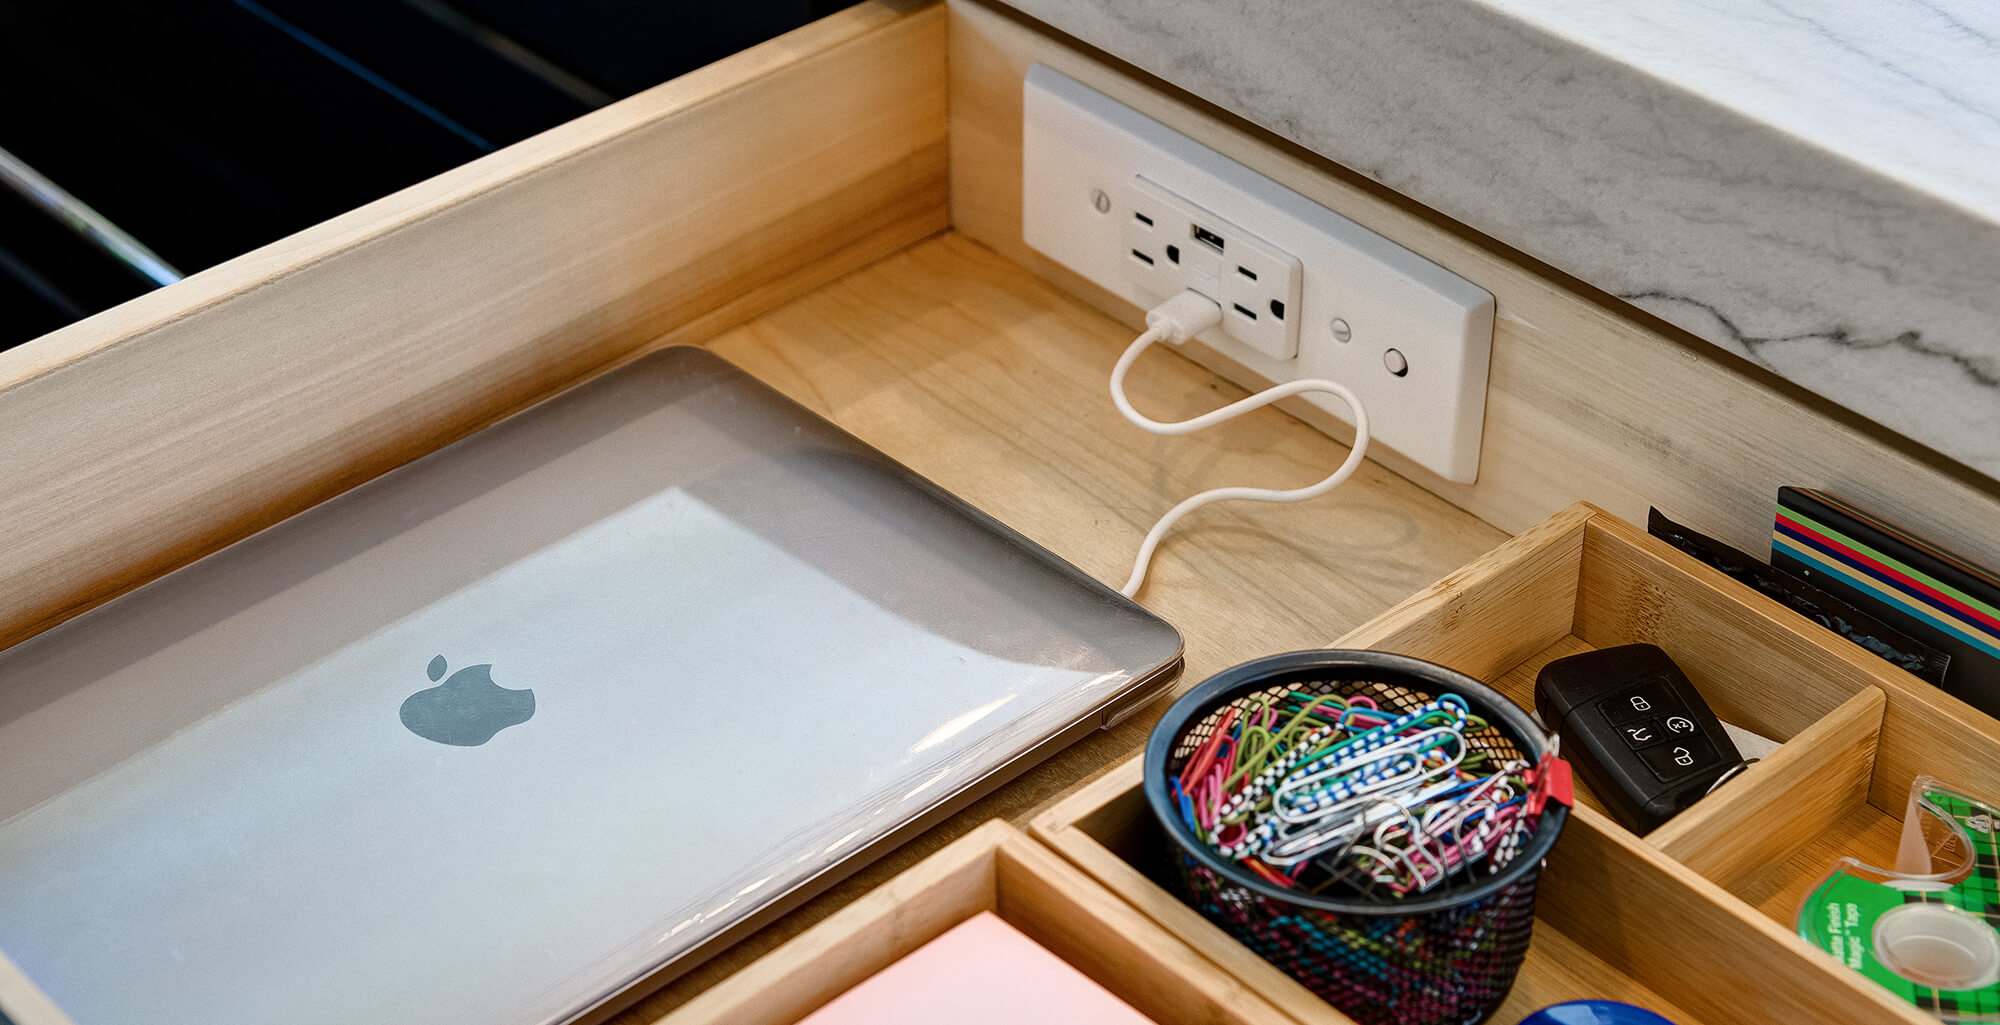 A cabinet drawer with a charging outlet inside the drawer for charging and powering electronic devices.